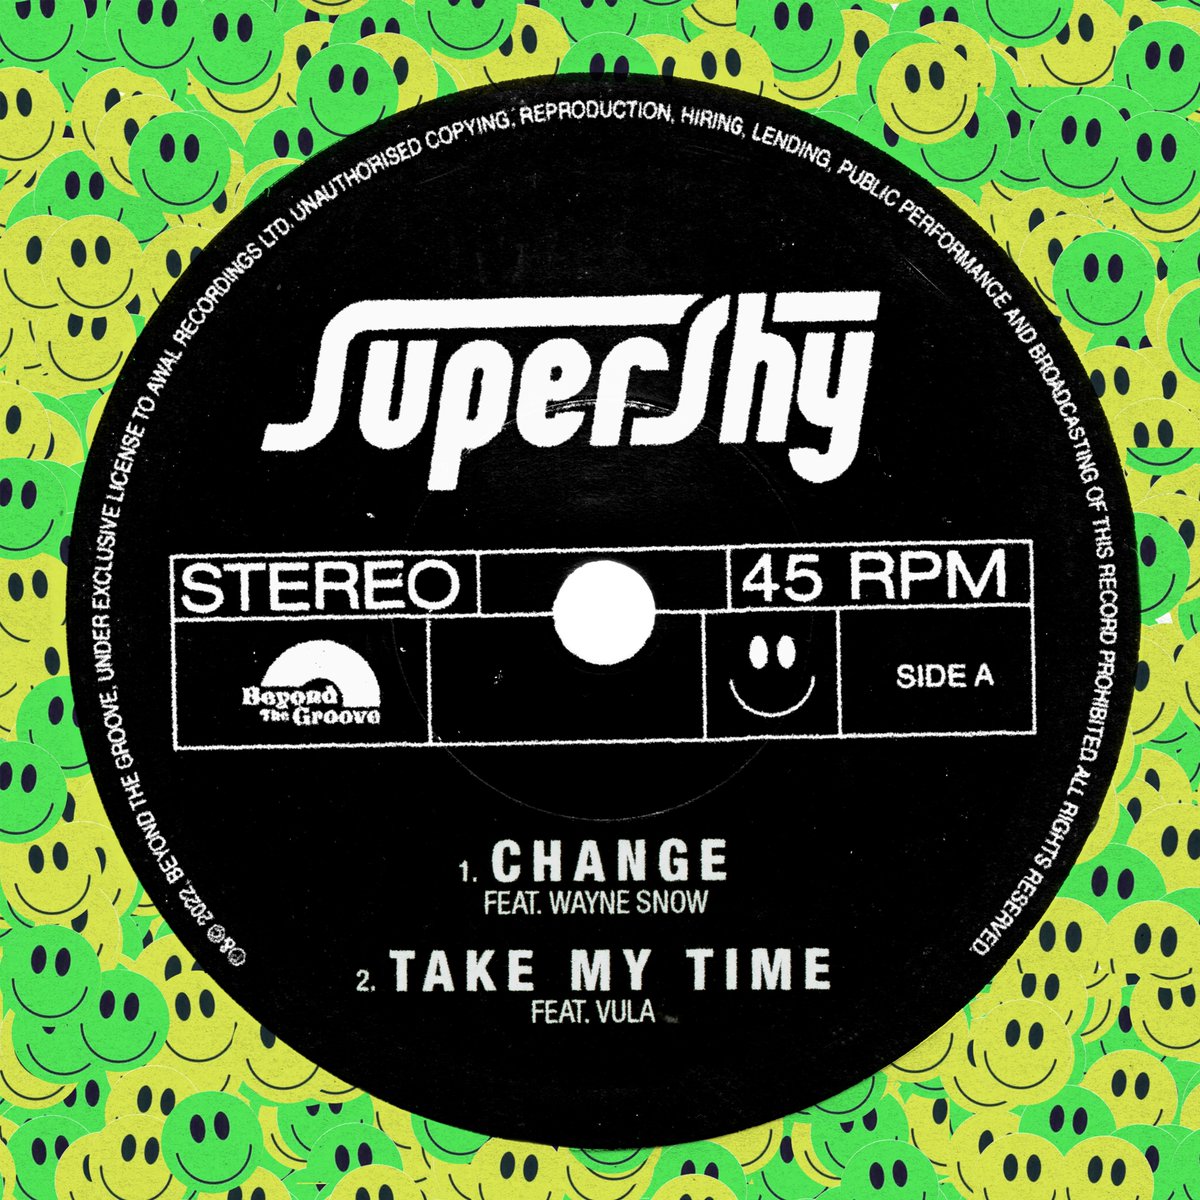 New music from Supershy 🥸 “Change” feat @waynesnowmusic and “Take My Time” feat @Vulavox Out Now: supershy.ffm.to/change Big love to @weareparisi on the co prod with “Change”!